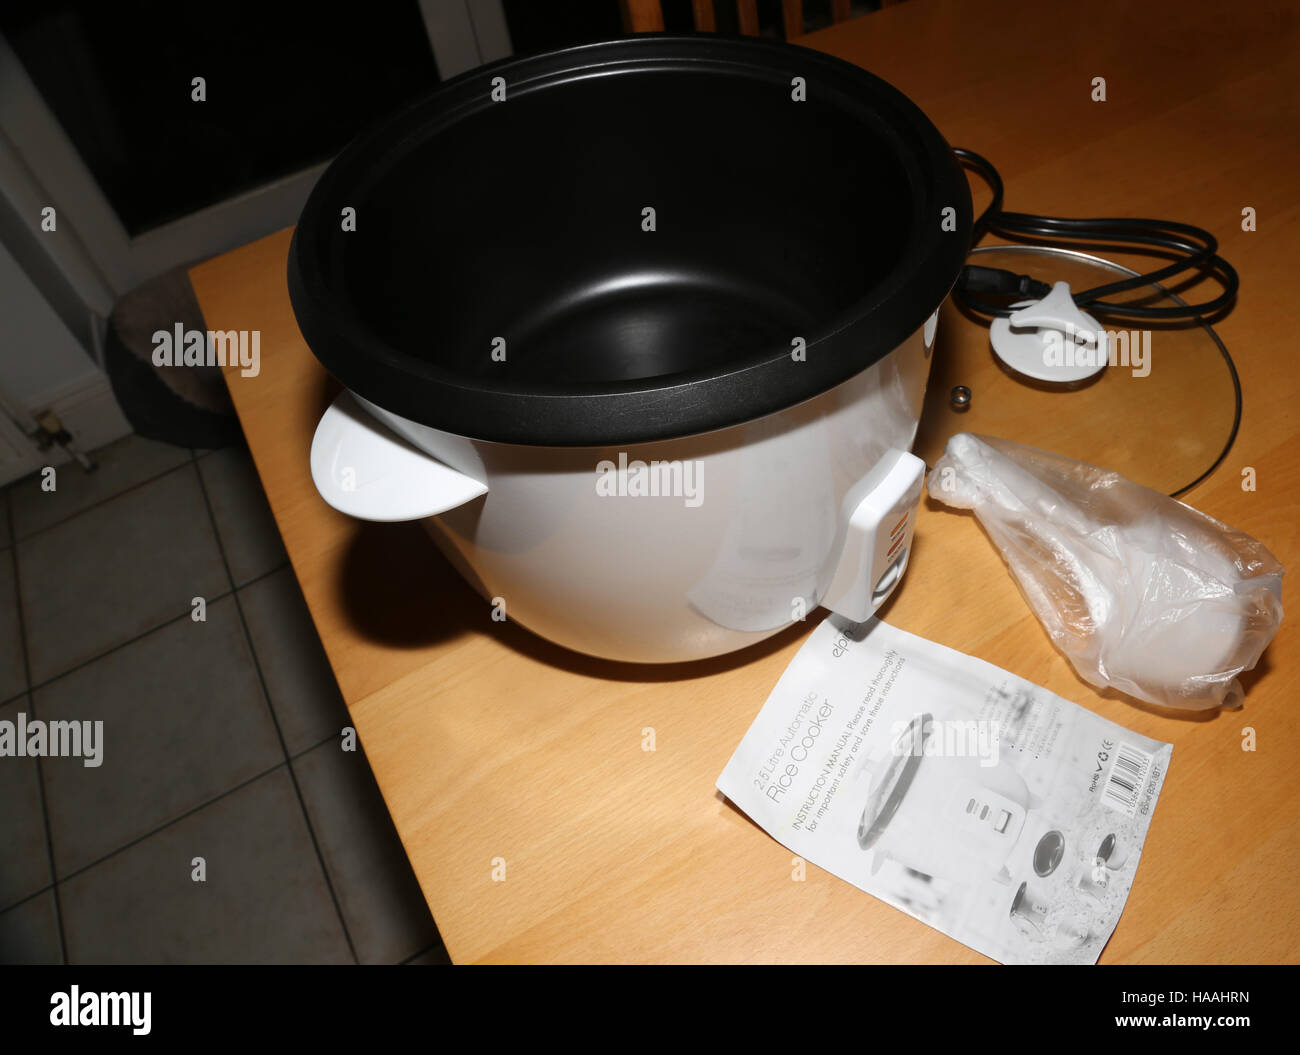 Rice Cooker And Instructions Stock Photo